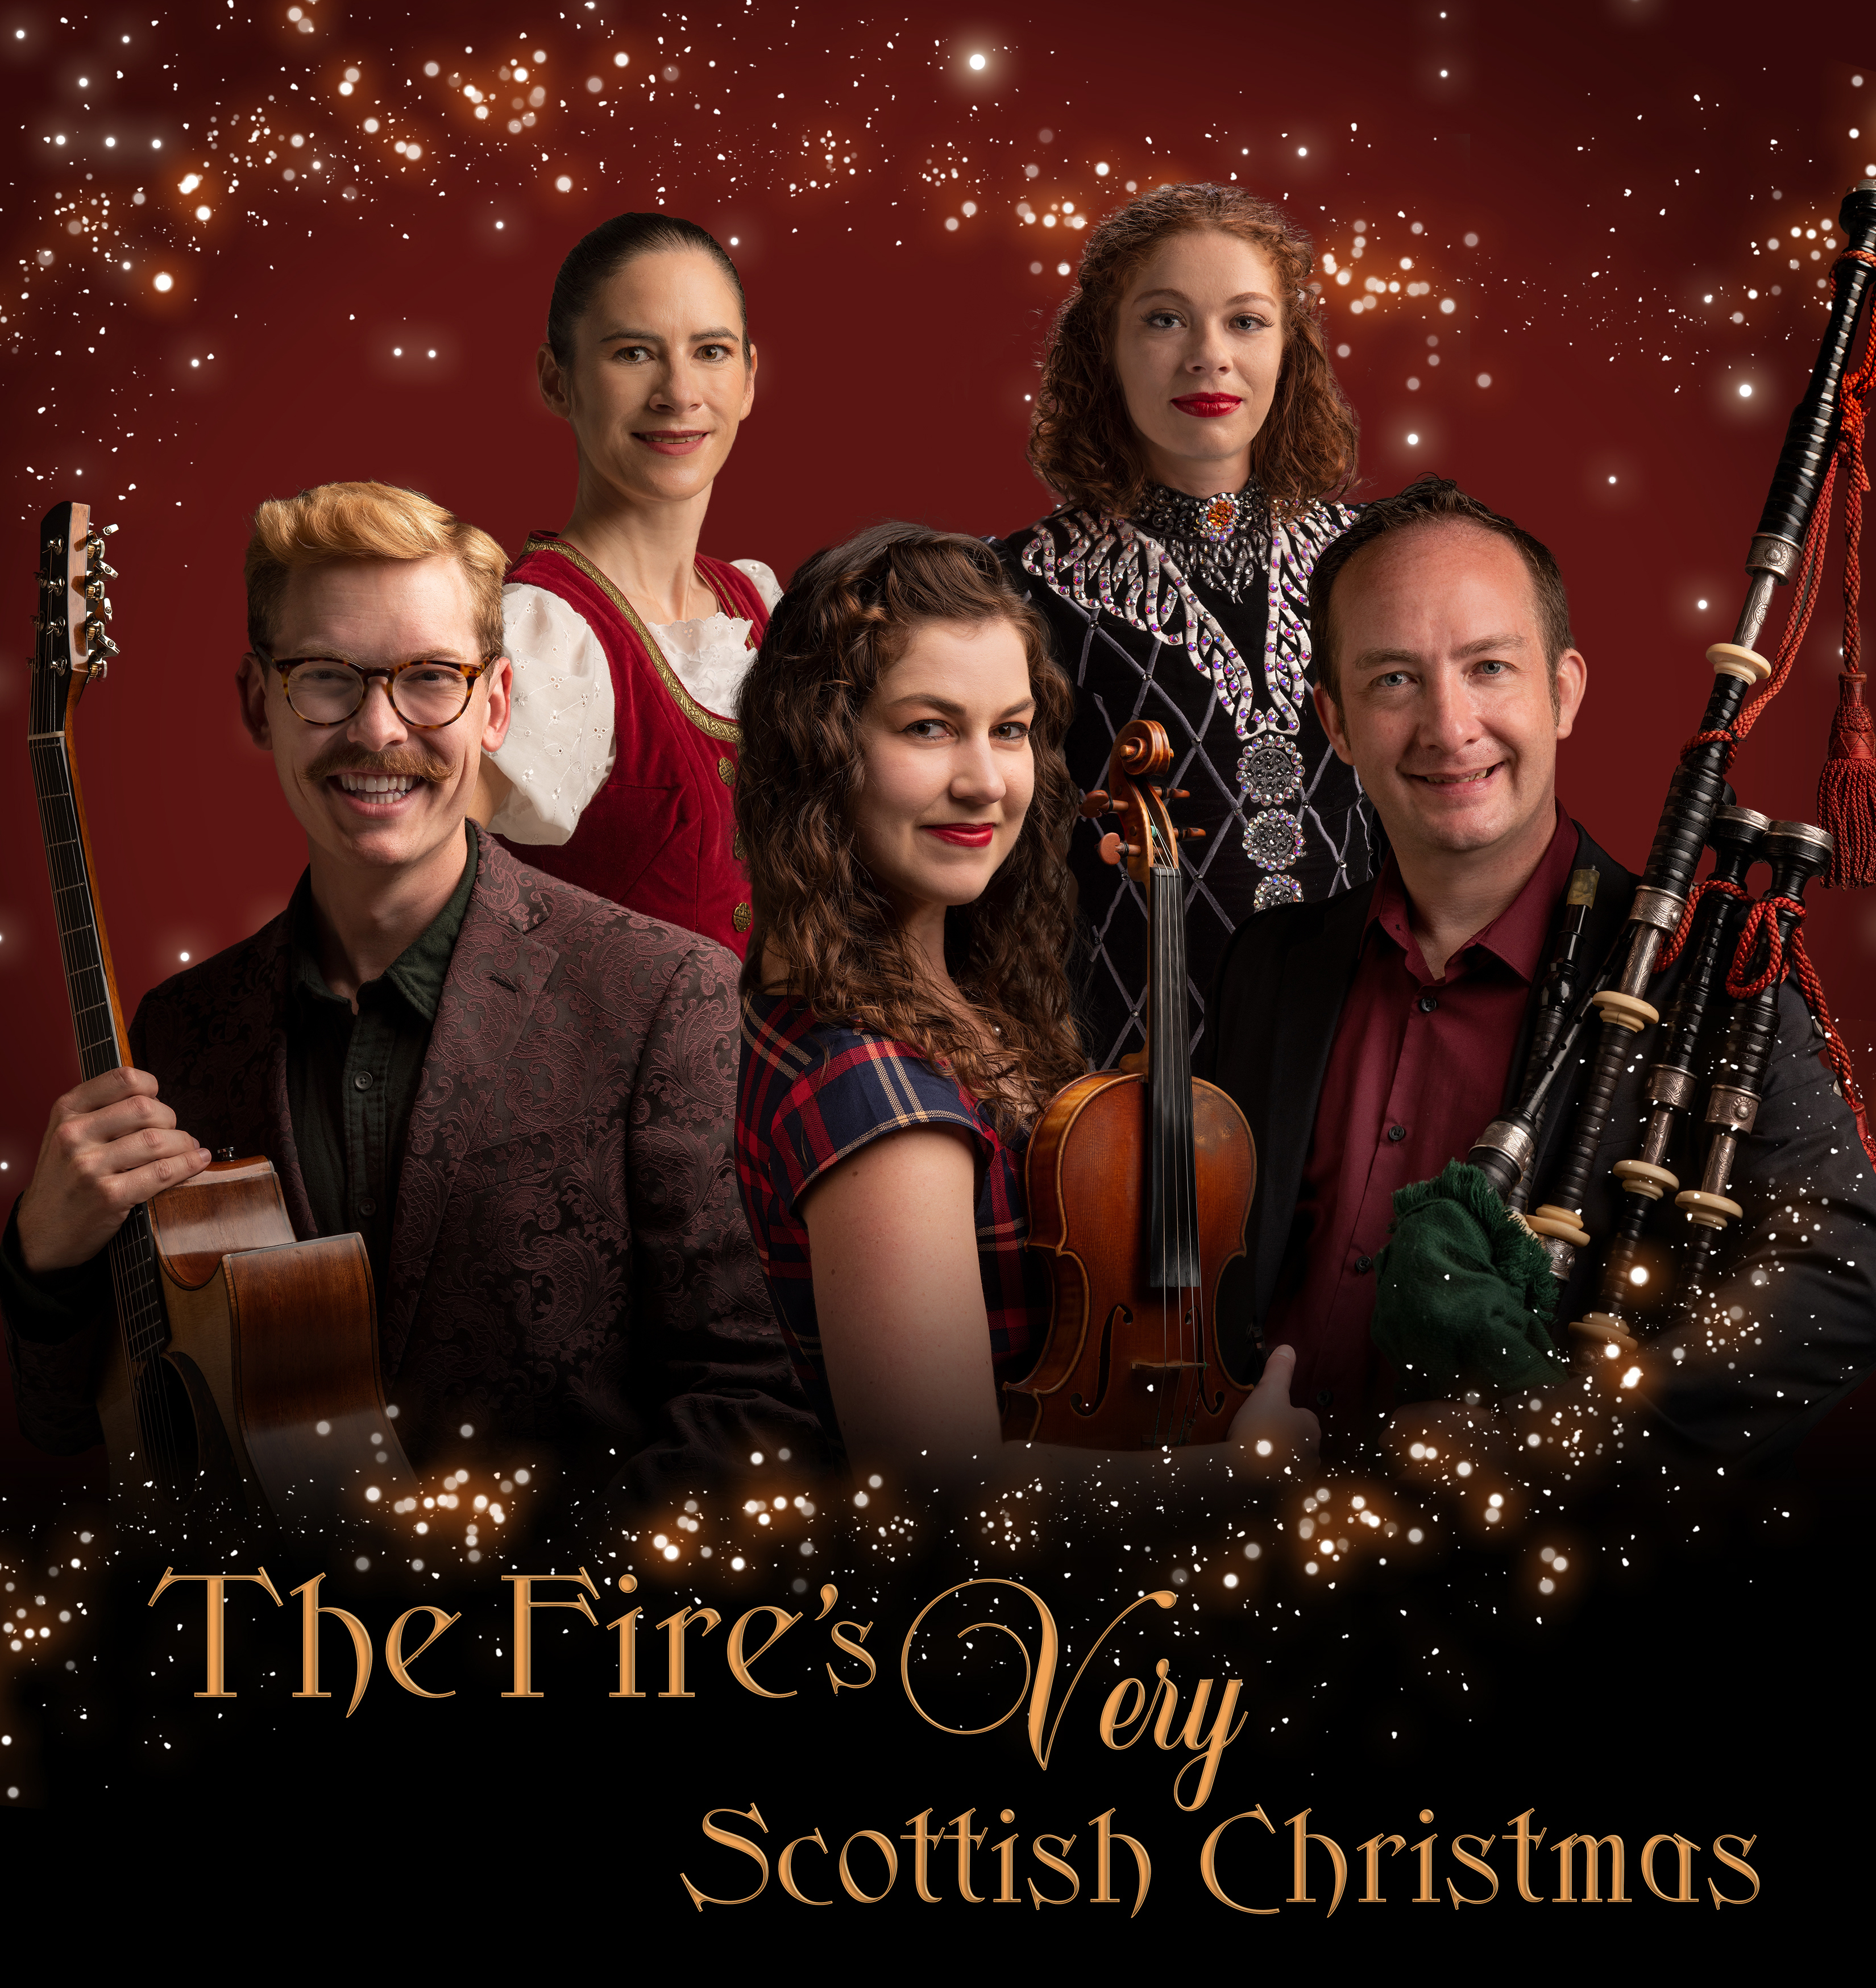 The Fire's Very Scottish Christmas photo